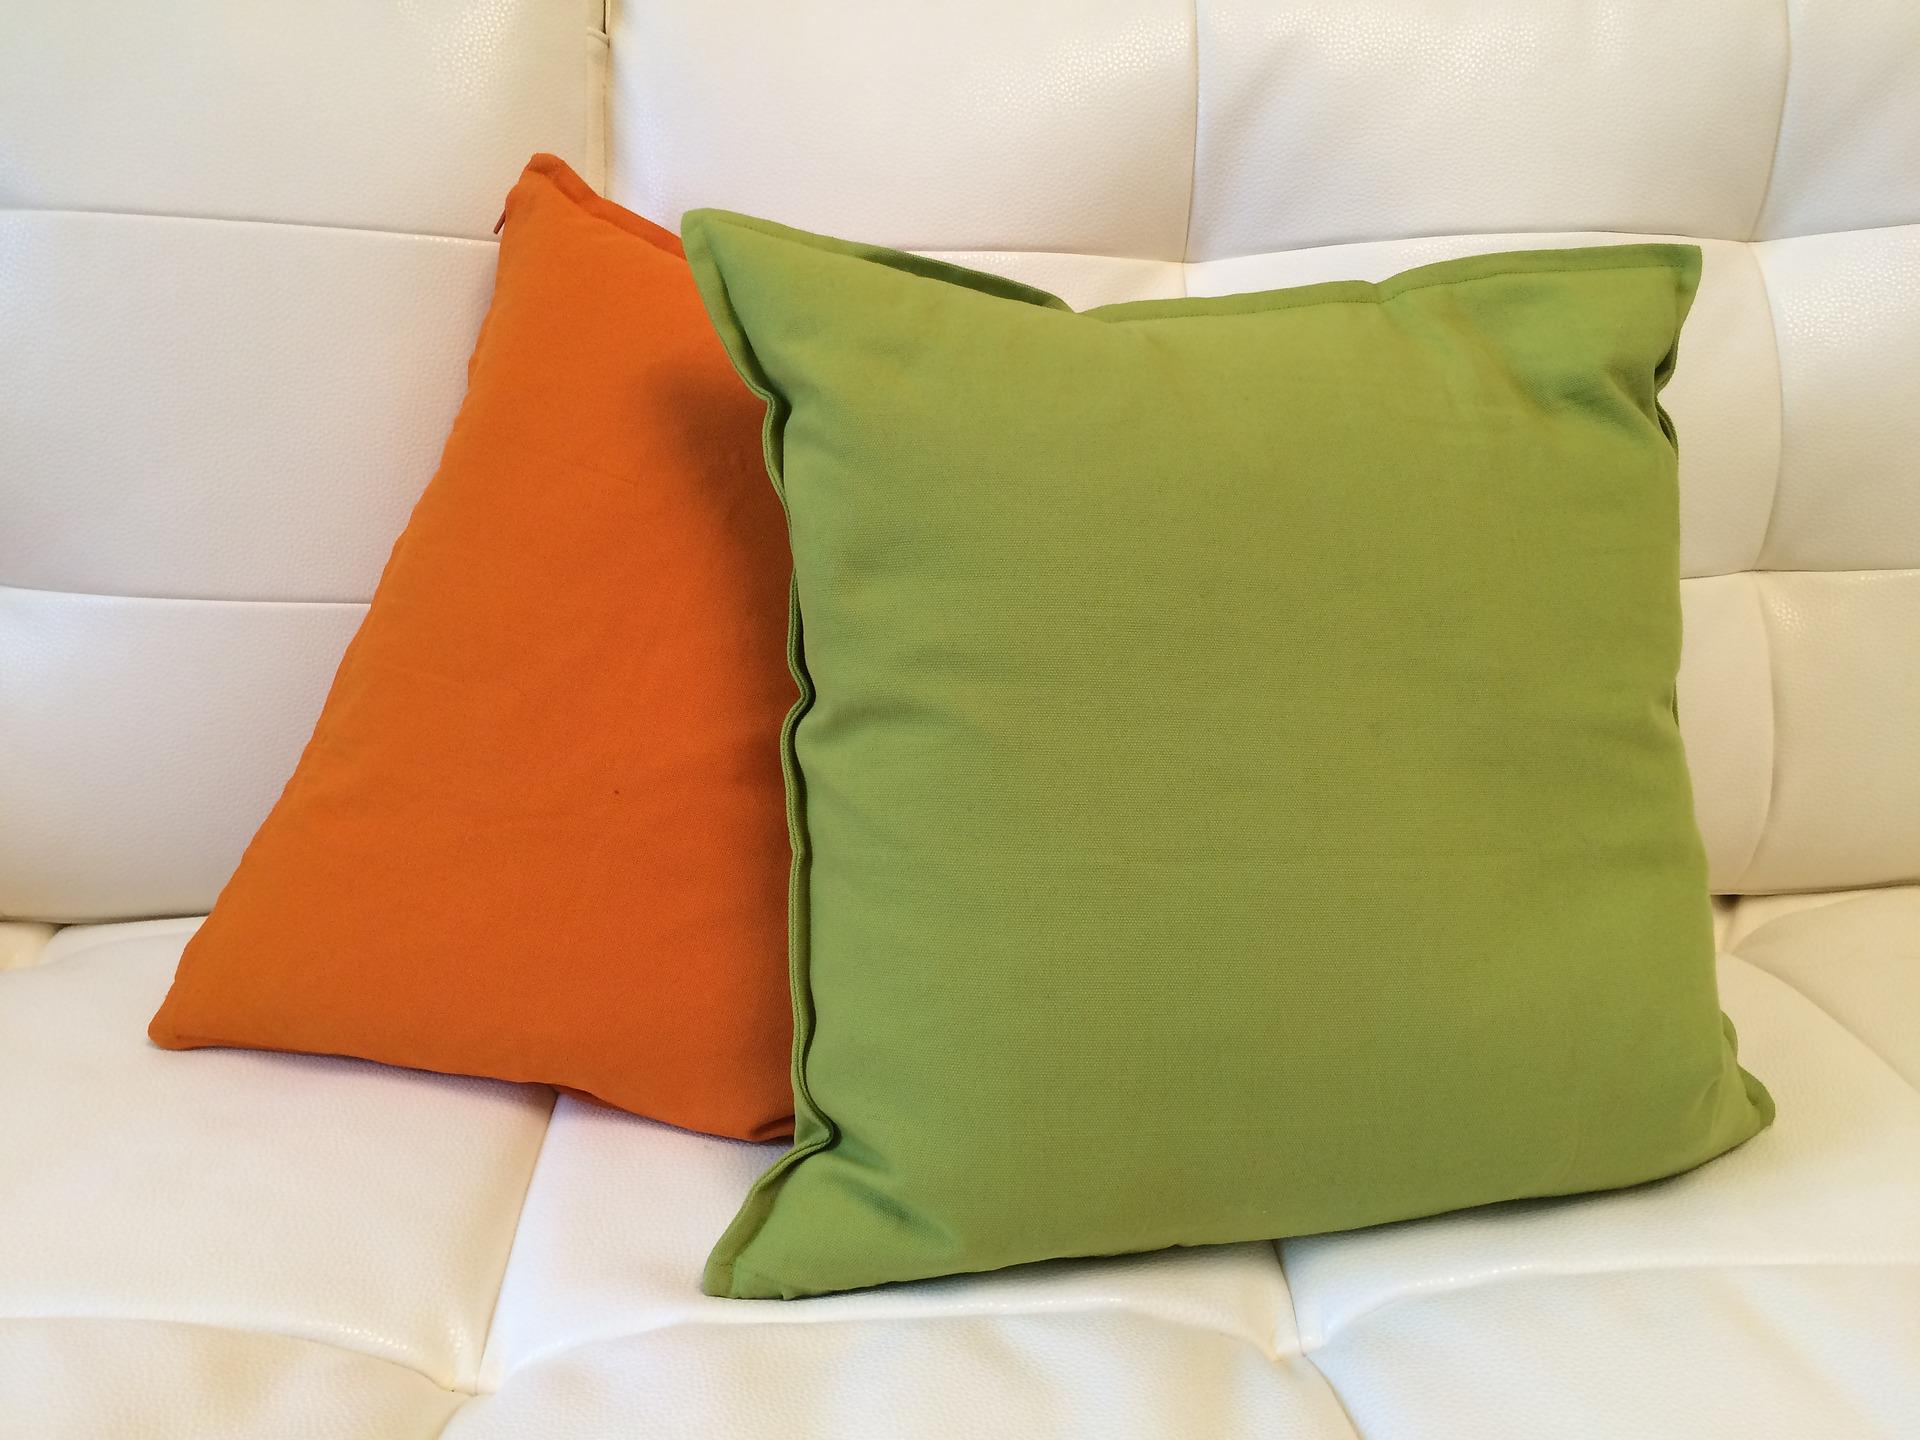 5 Things To Know Before Buying a Pillow